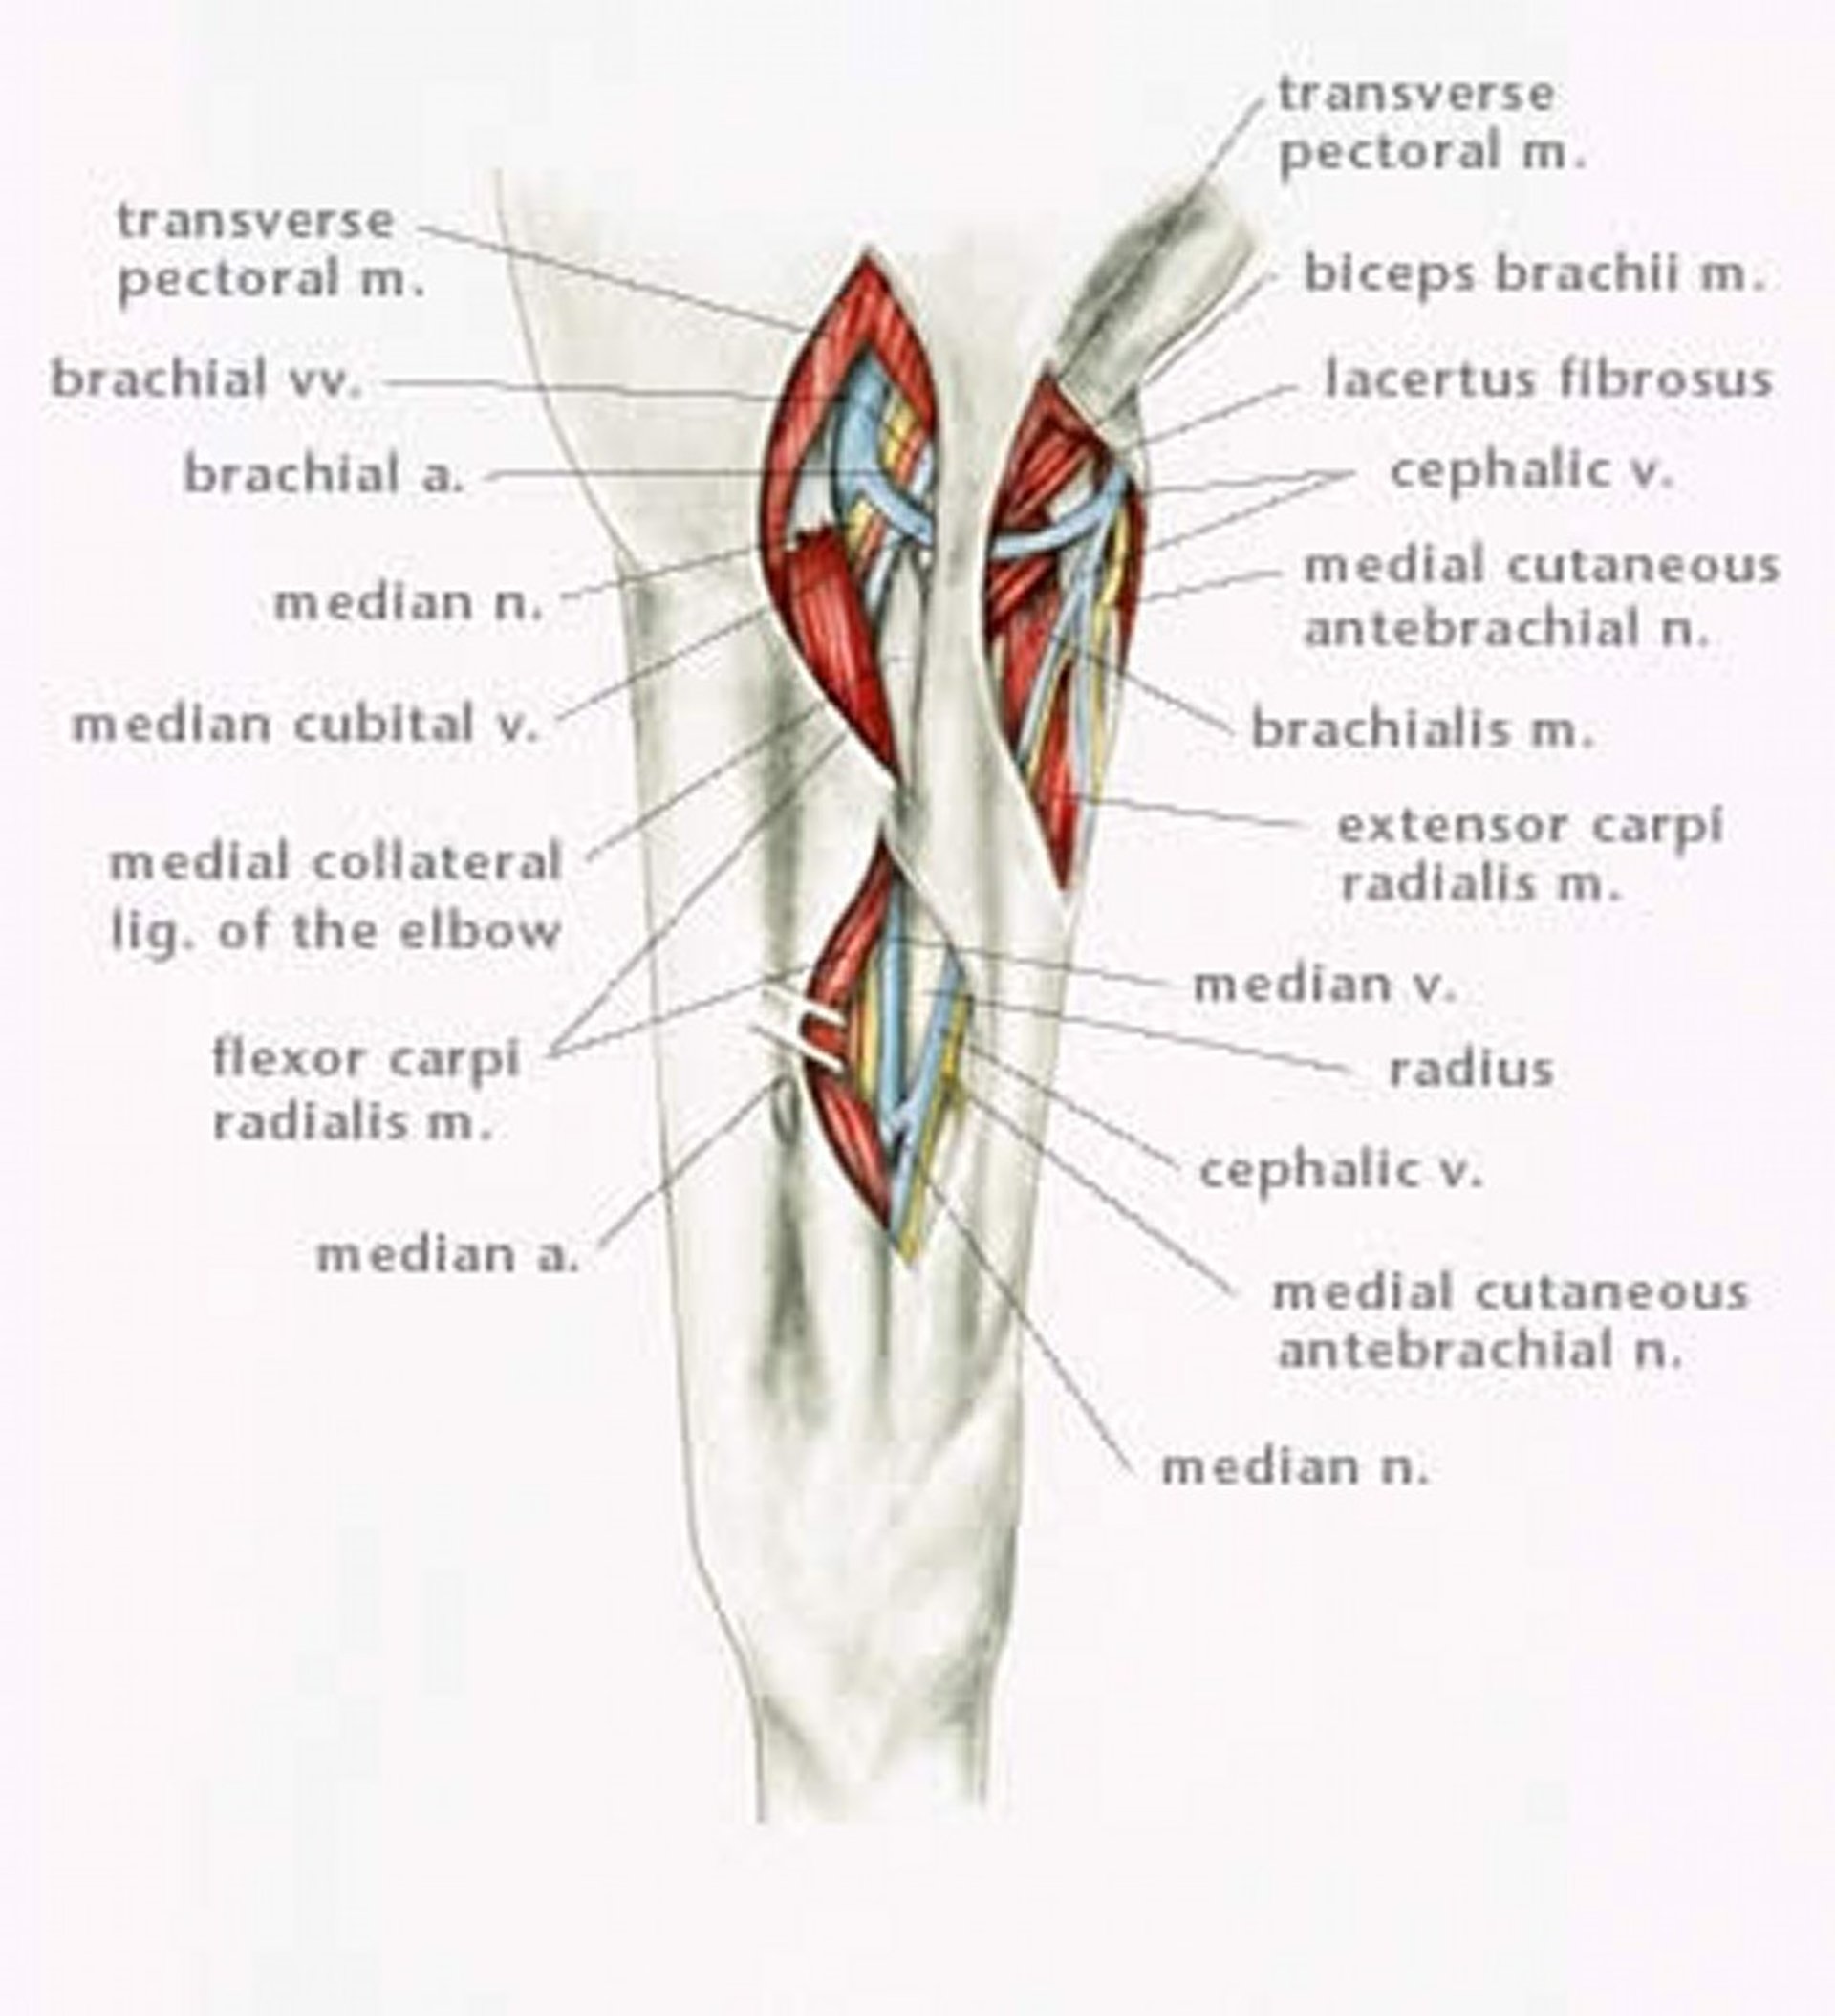 Anatomy for nerve block in forelimb and medial forelimb, horse